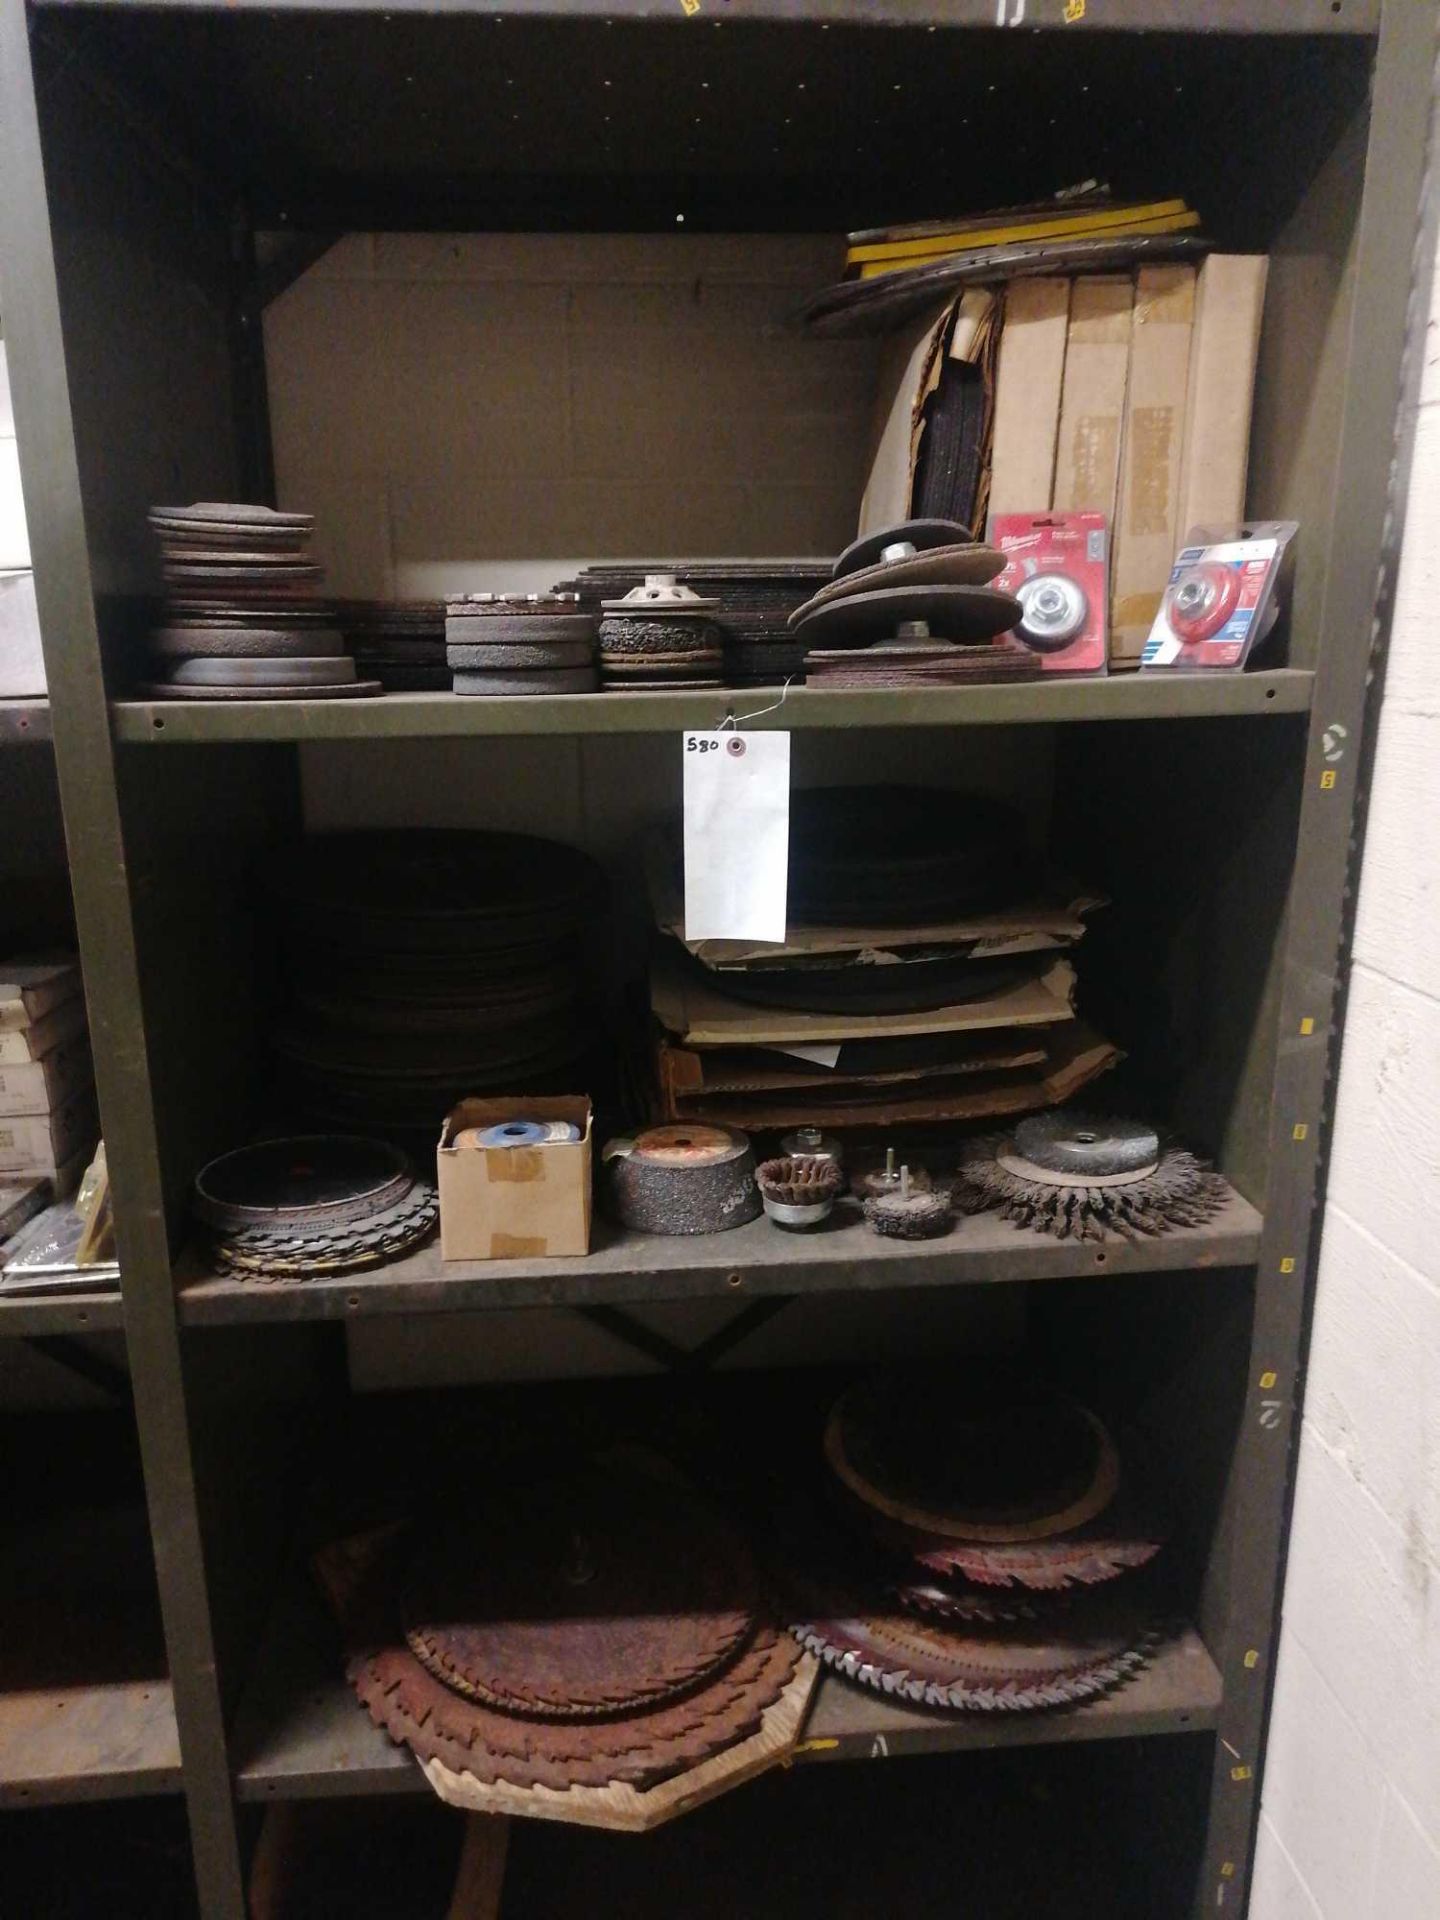 Shelves of Used Saw Blades